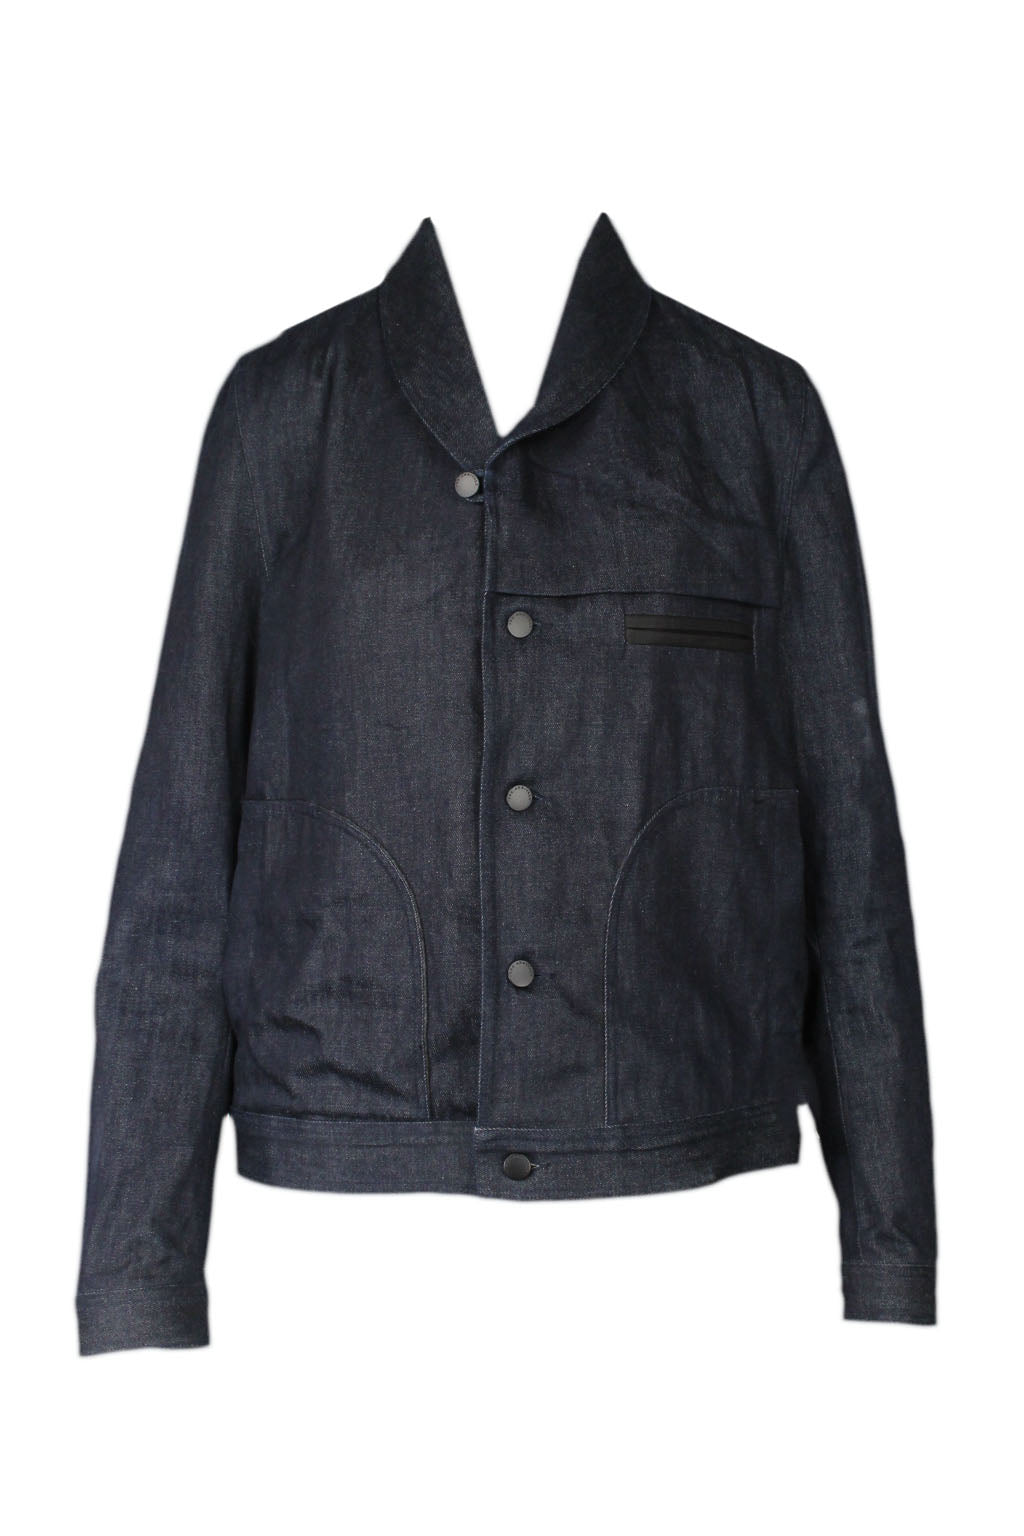 front of the arrivals dark blue cotton jacket. features shawl collar, welted pocket at left bust, side seam pockets, button at cuffs, and button closure. 